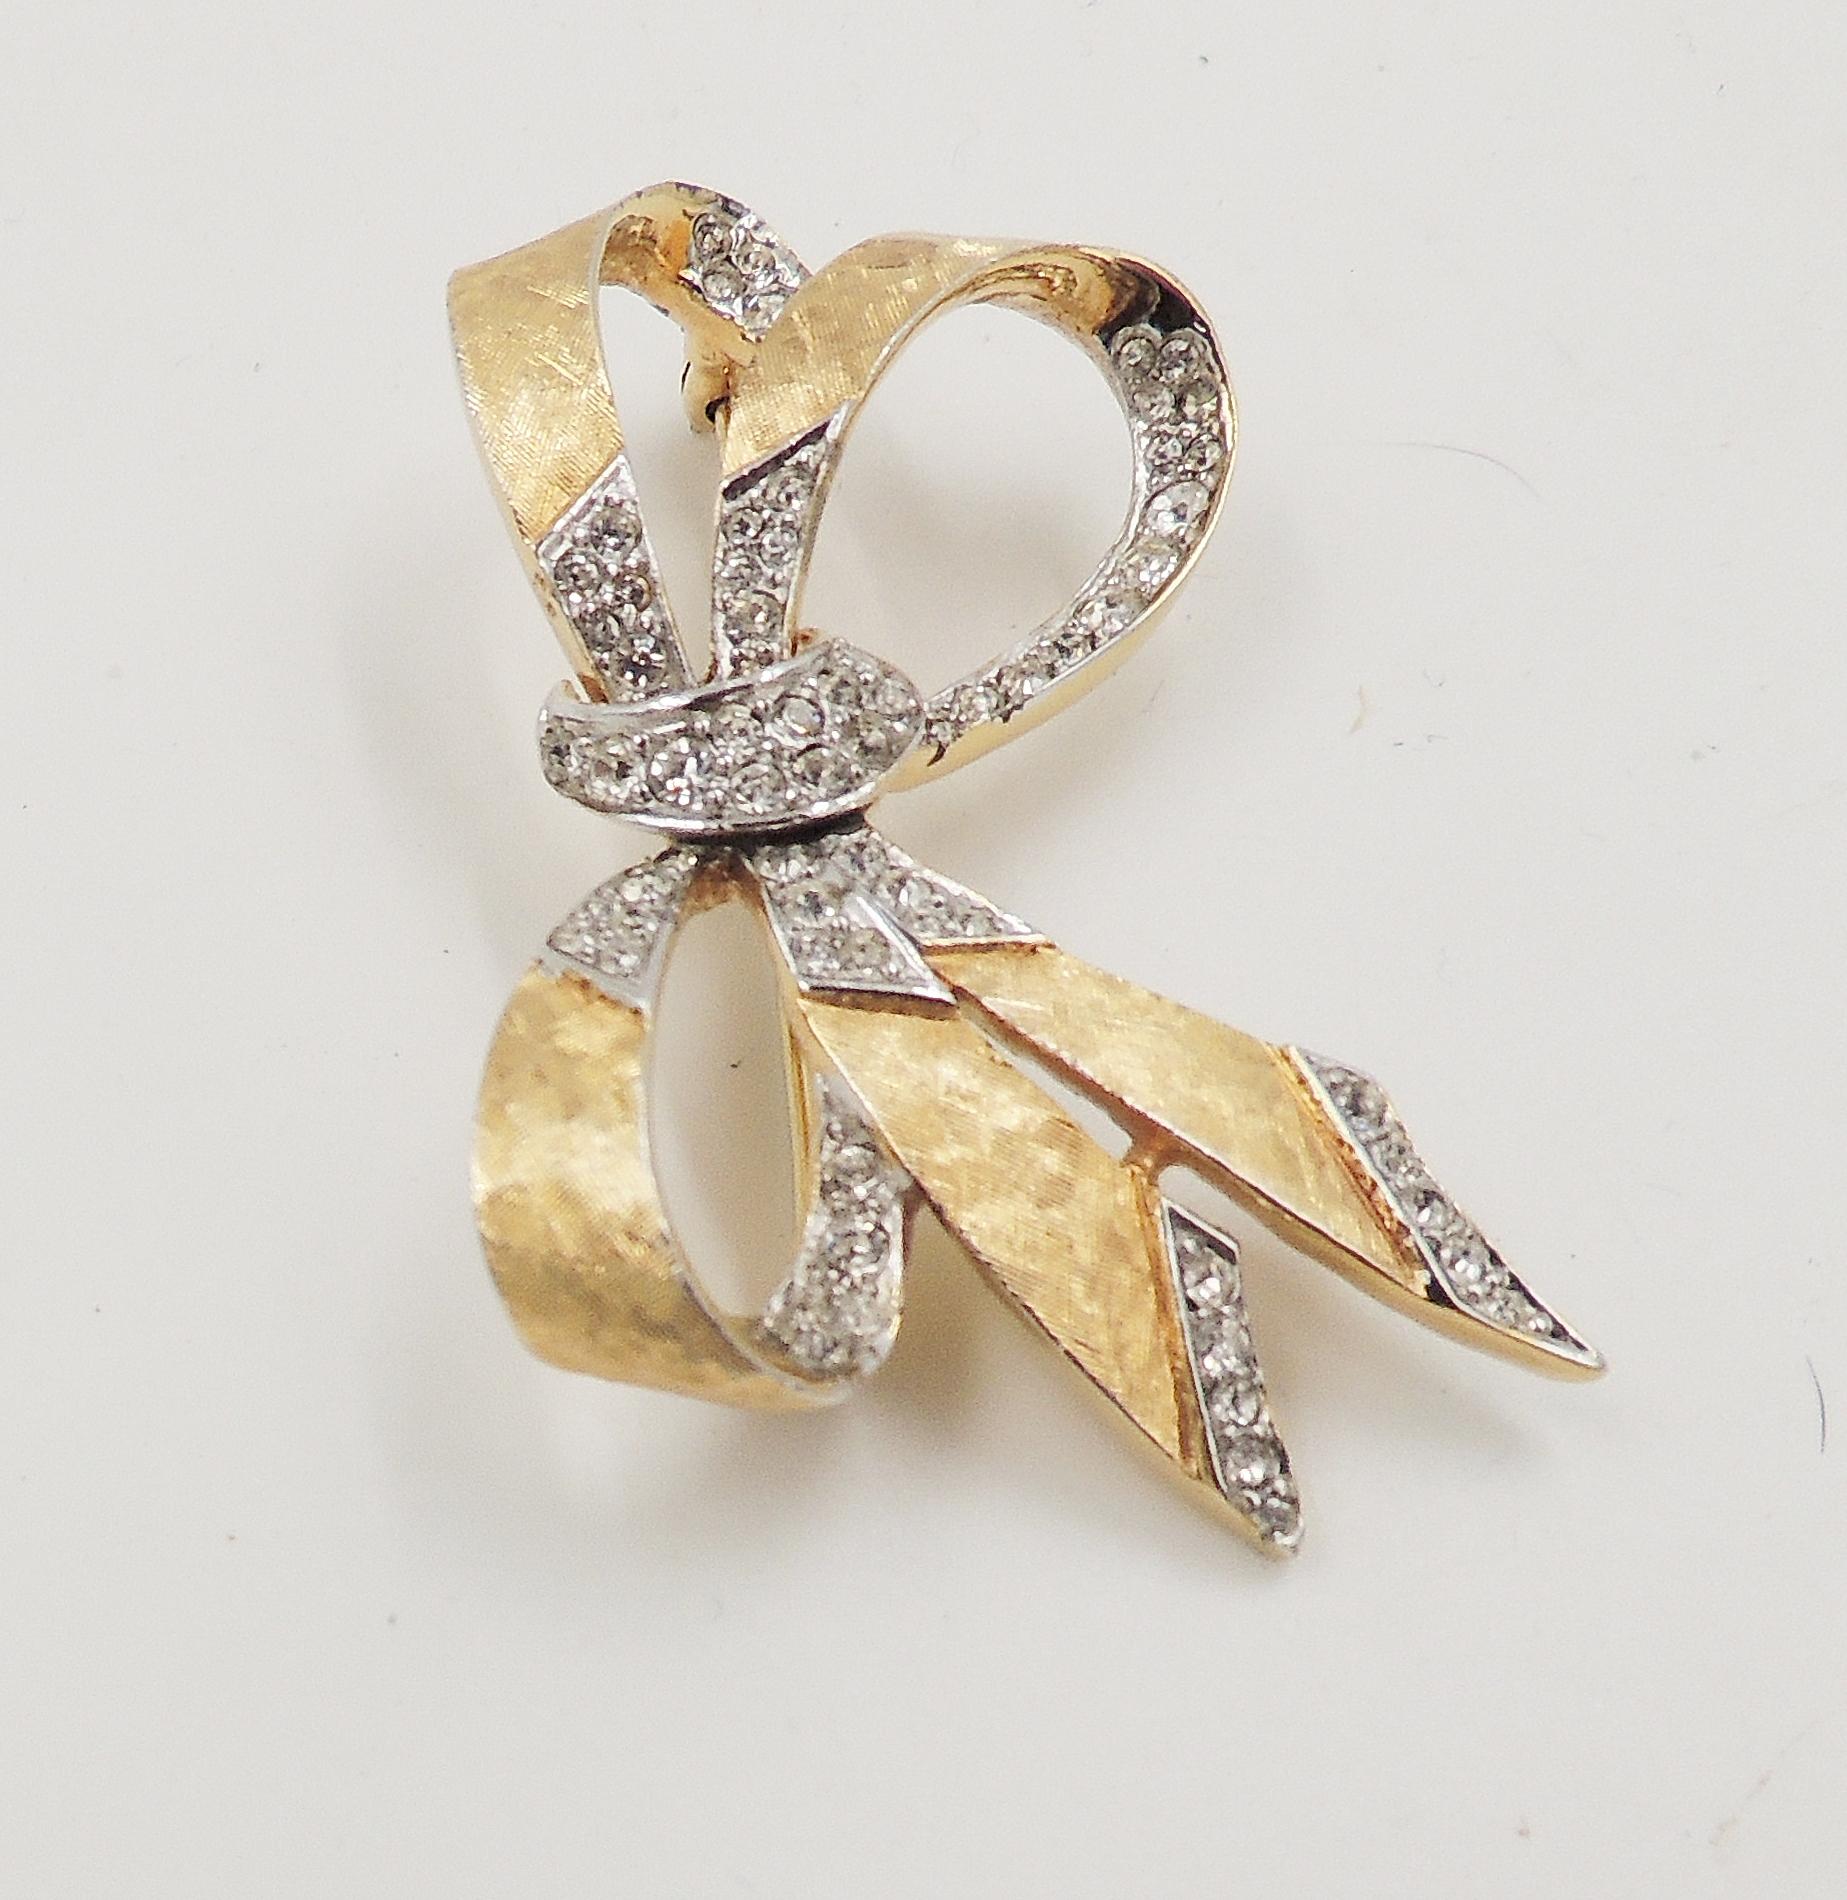 Late 1960s textured goldtone and clear rhinestone brooch with security clasp. Marked 